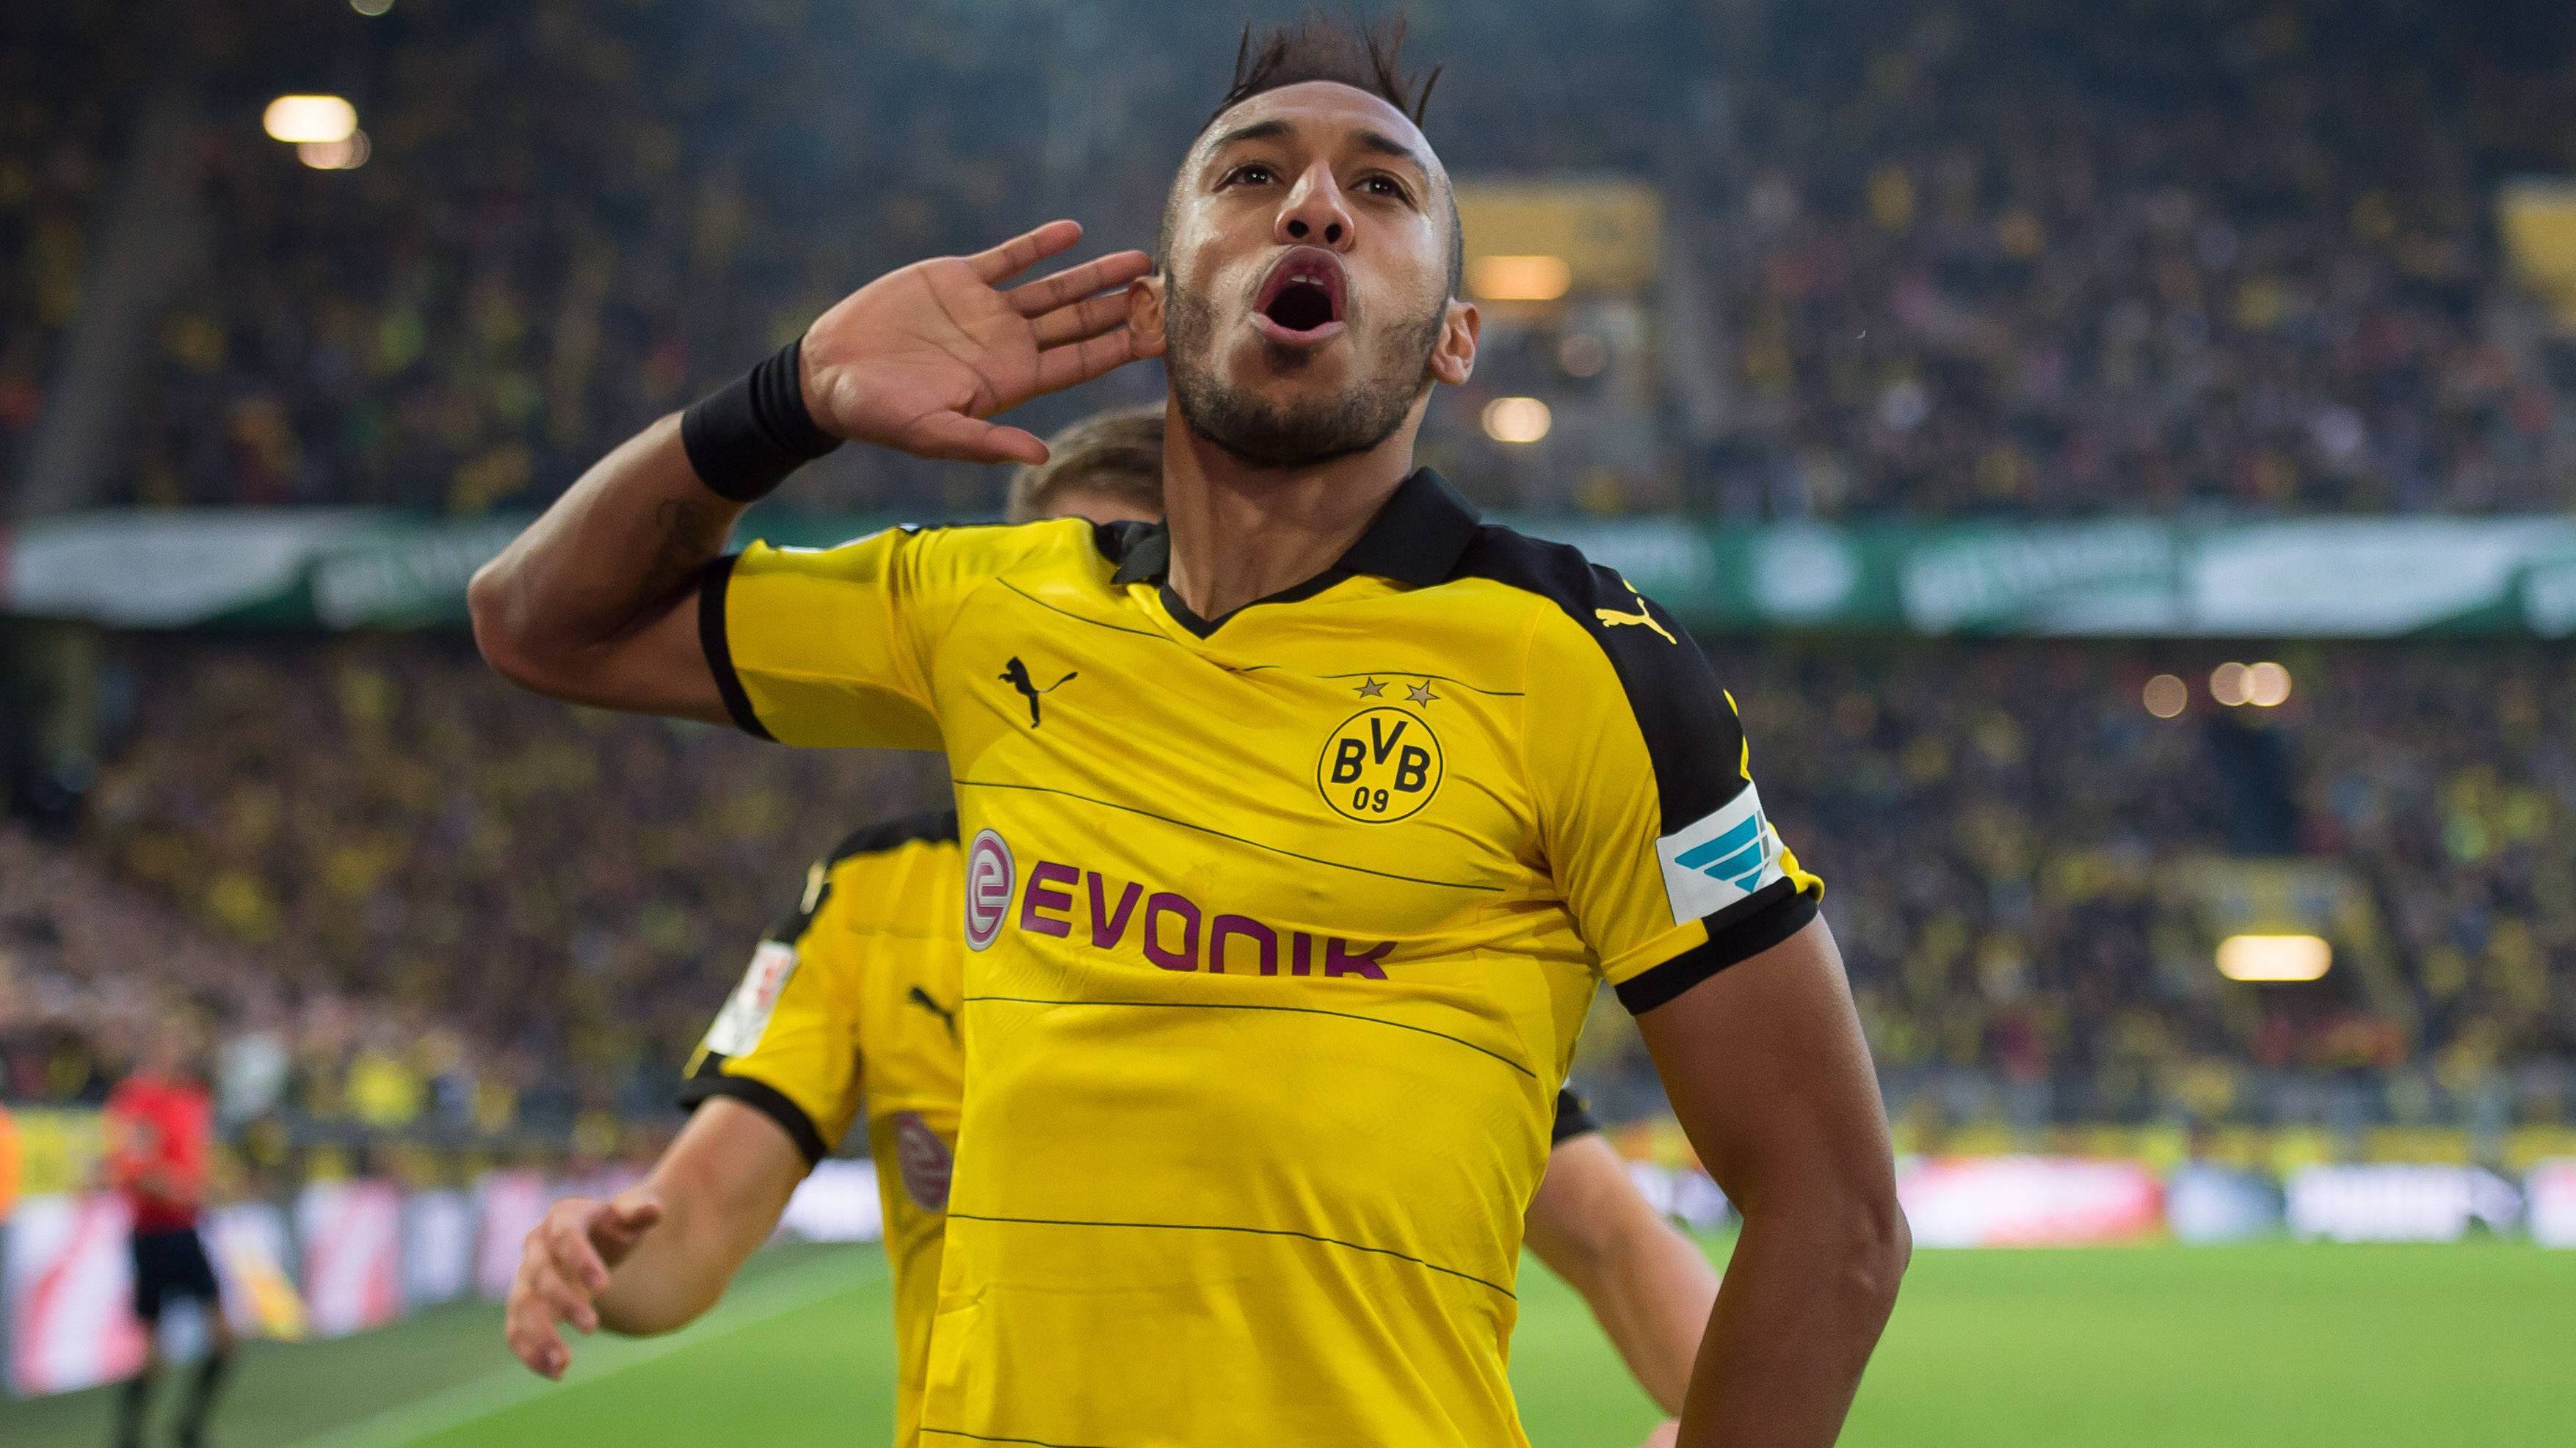 Aubameyang Is marvelling this season with the Borussia